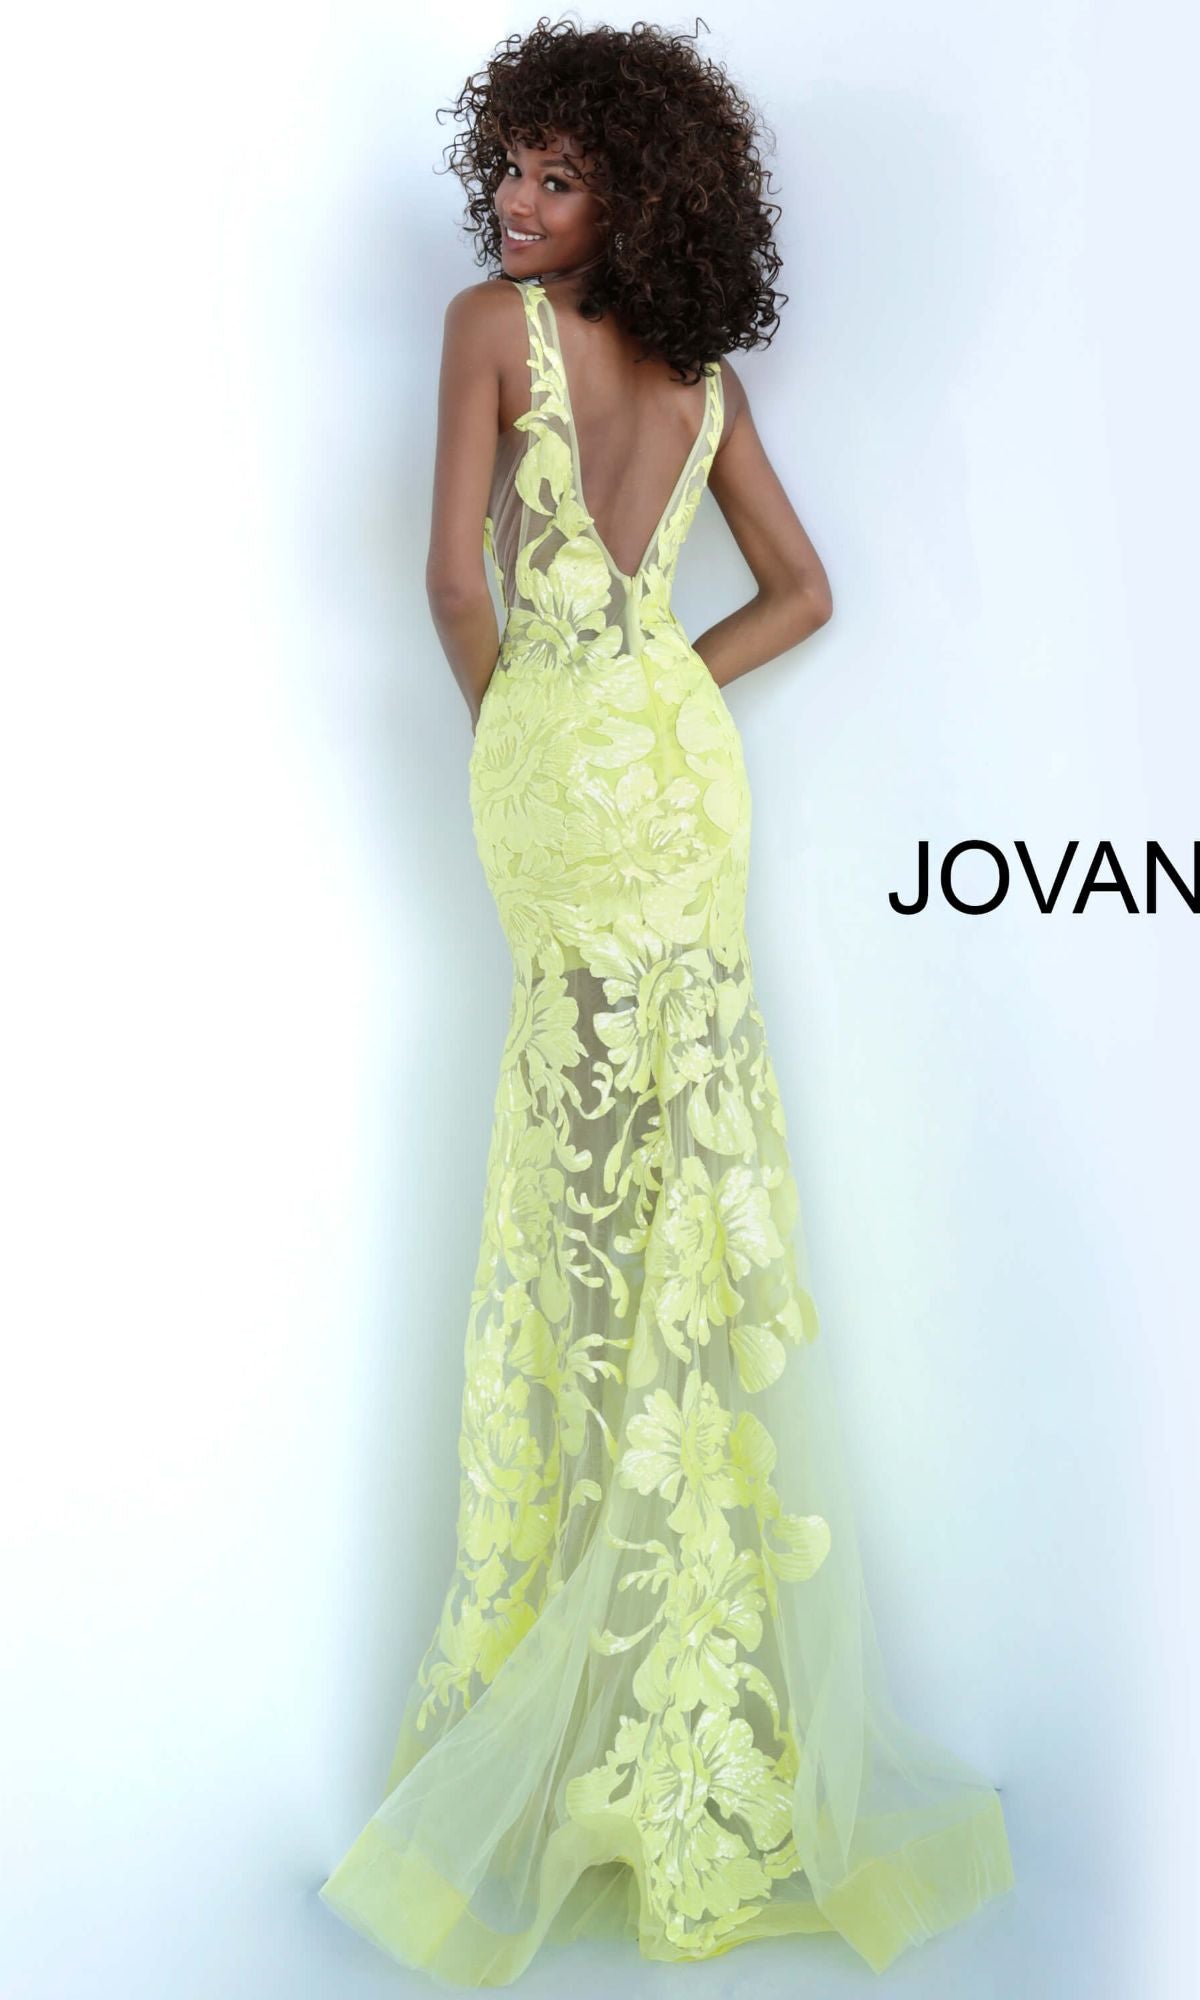 Jovani Embroidered Long Prom Dress with Sequins